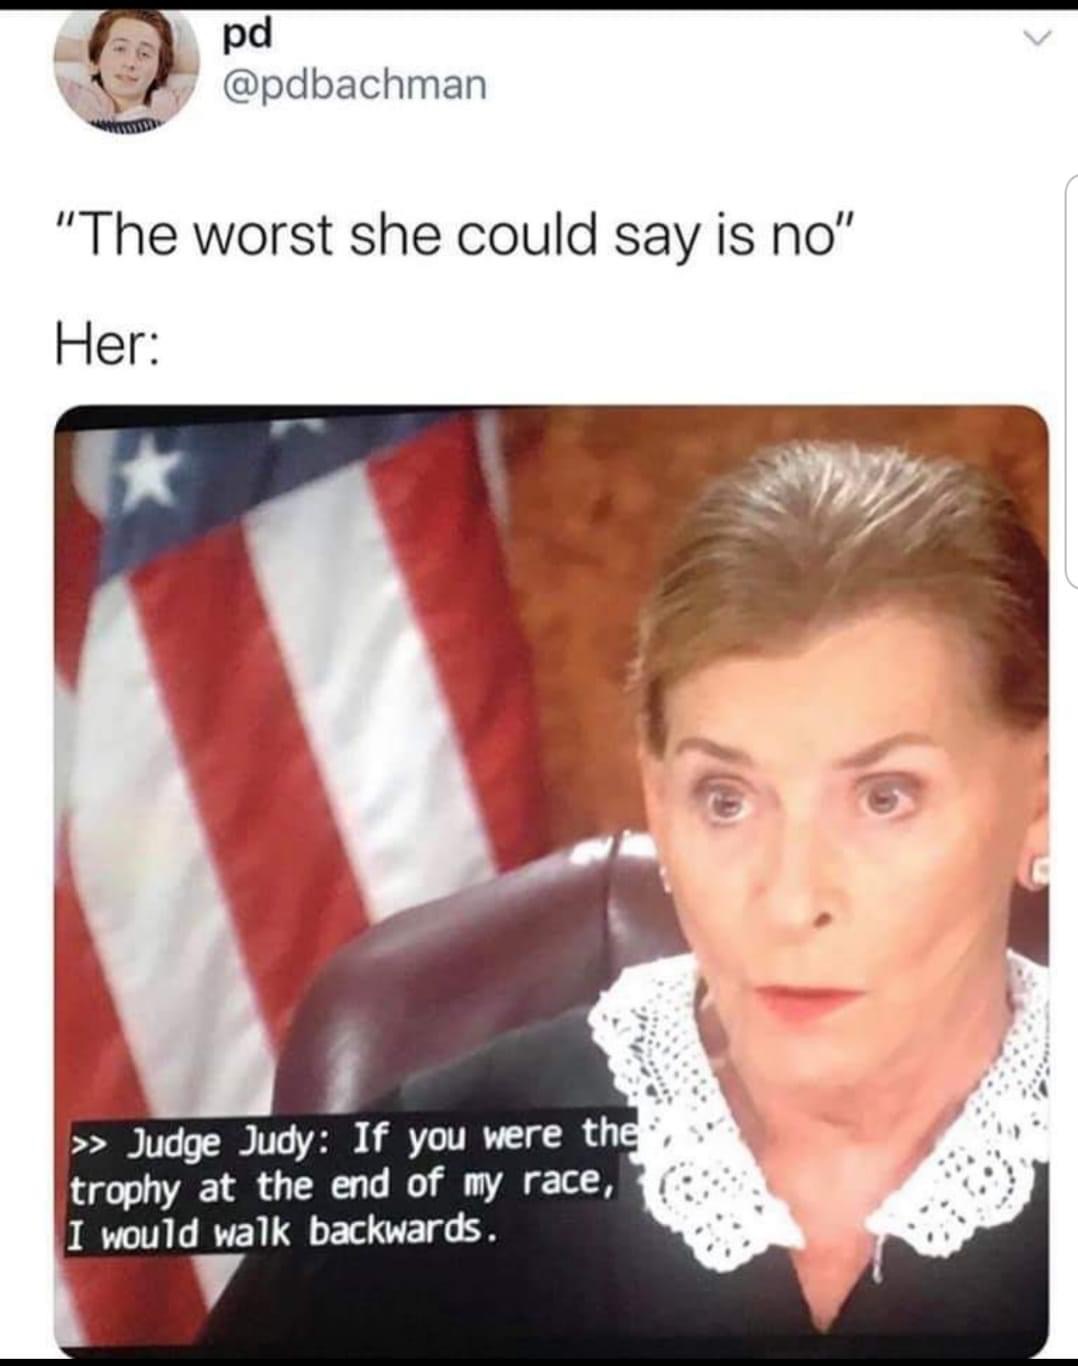 memes judge judy - pd "The worst she could say is no" Her >> Judge Judy If you were the trophy at the end of my race, I would walk backwards.